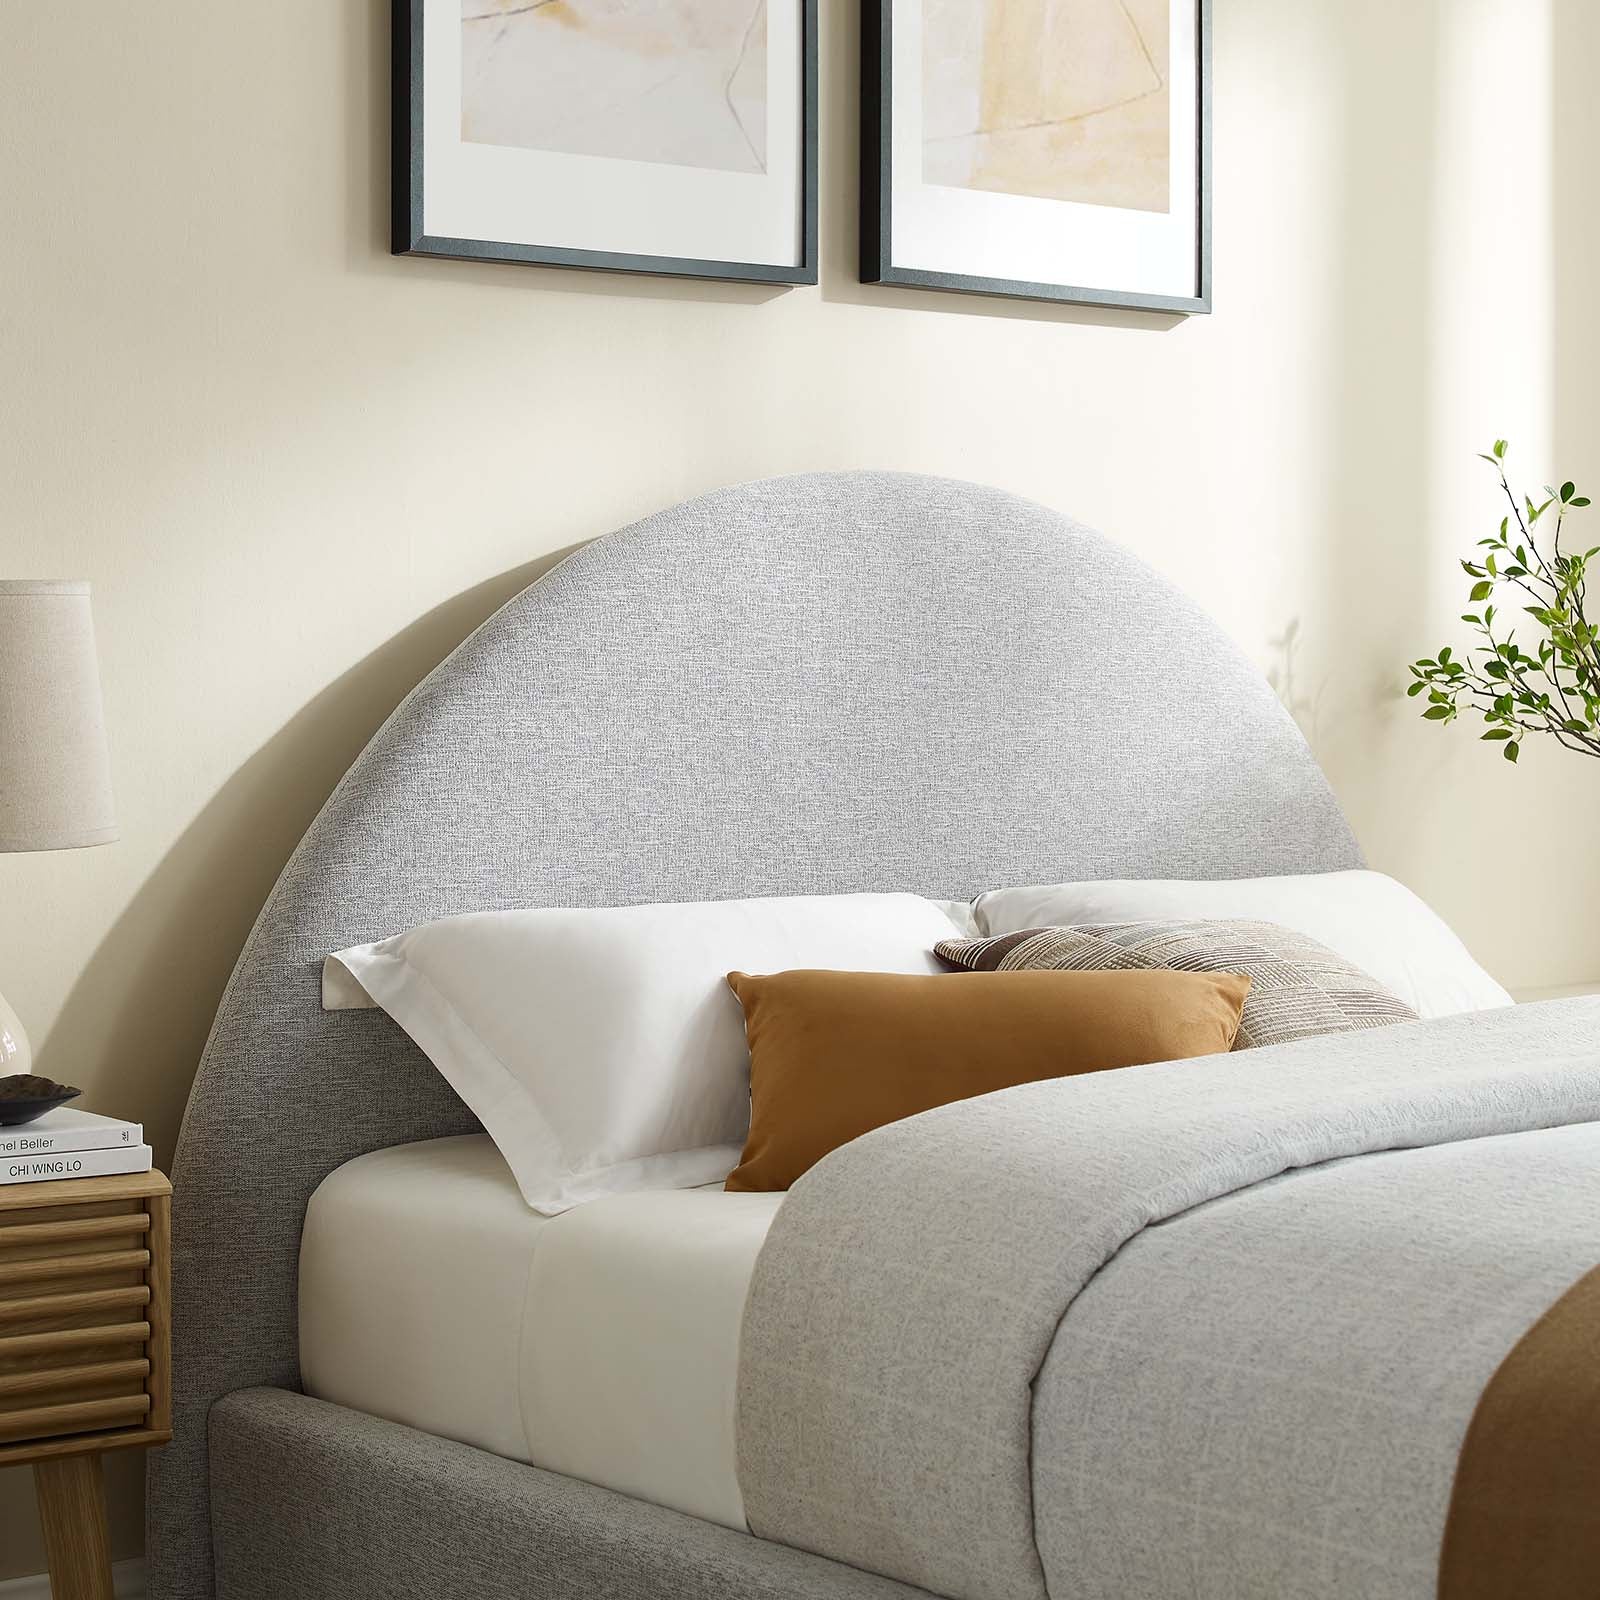 Cleo Arched Platform Bed - Heathered Weave Light Gray